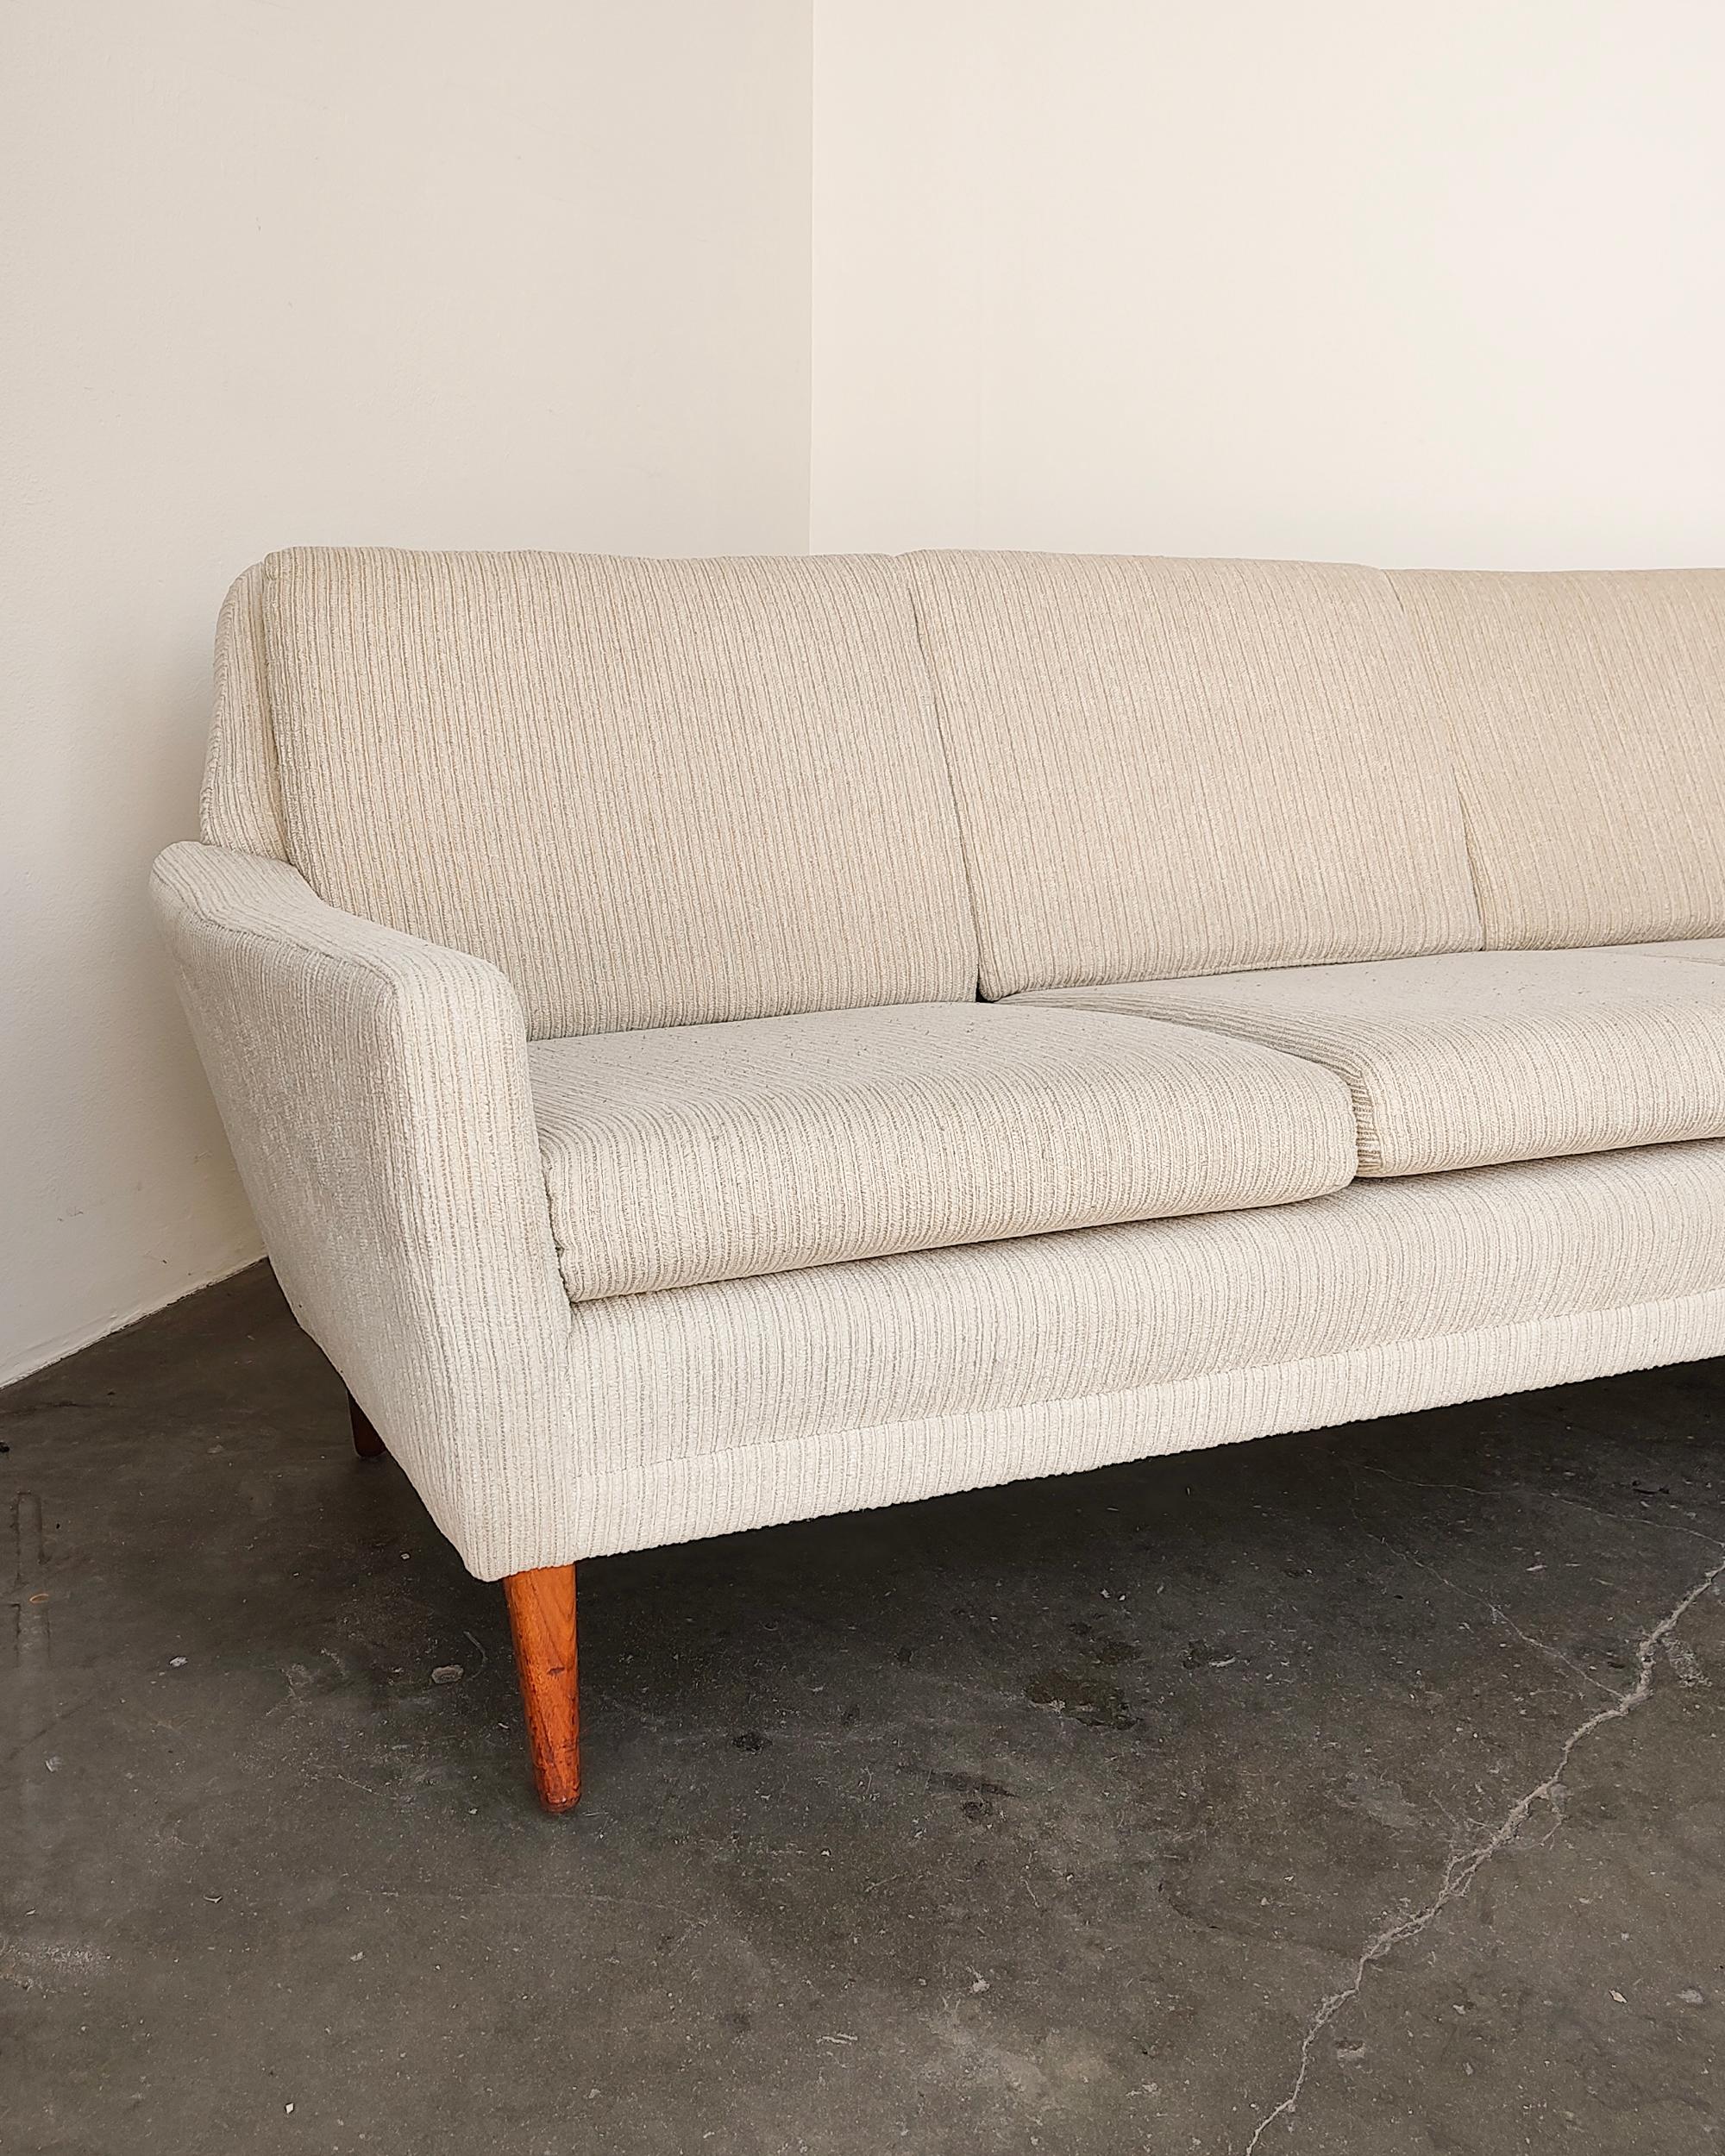 Beautiful four-seater mid-century sofa by Dux. Cushions are removable and upholstered on both sides. Excellent condition, original upholstery. There is one small faint red mark on back left corner of sofa, see photo. No tag. 

96